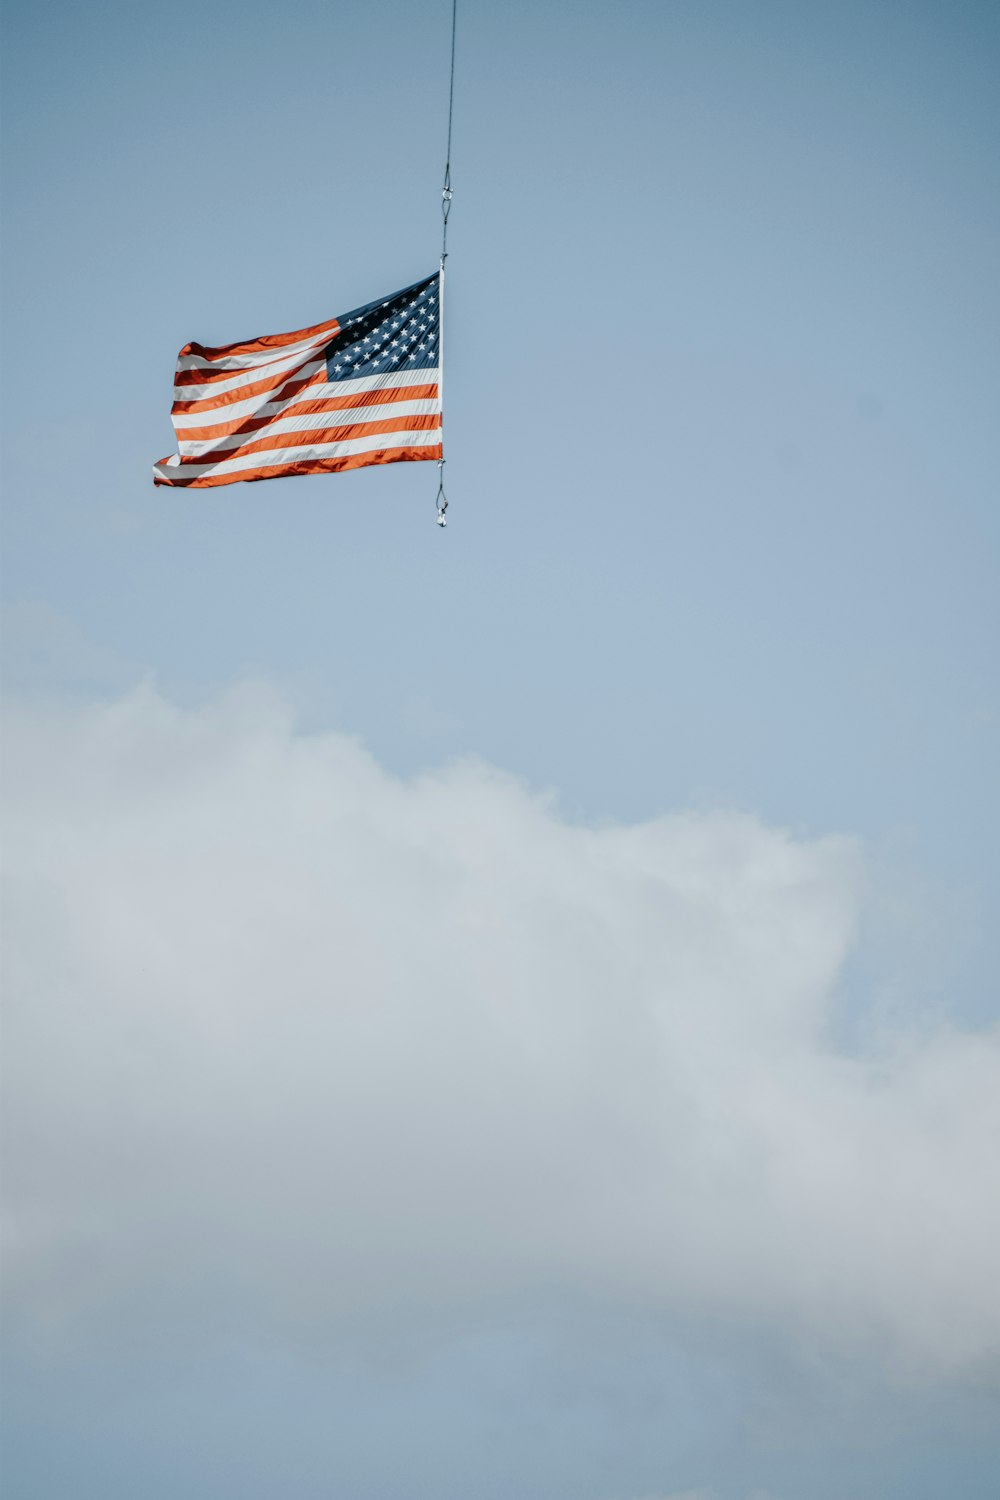 an american flag is flying in the sky